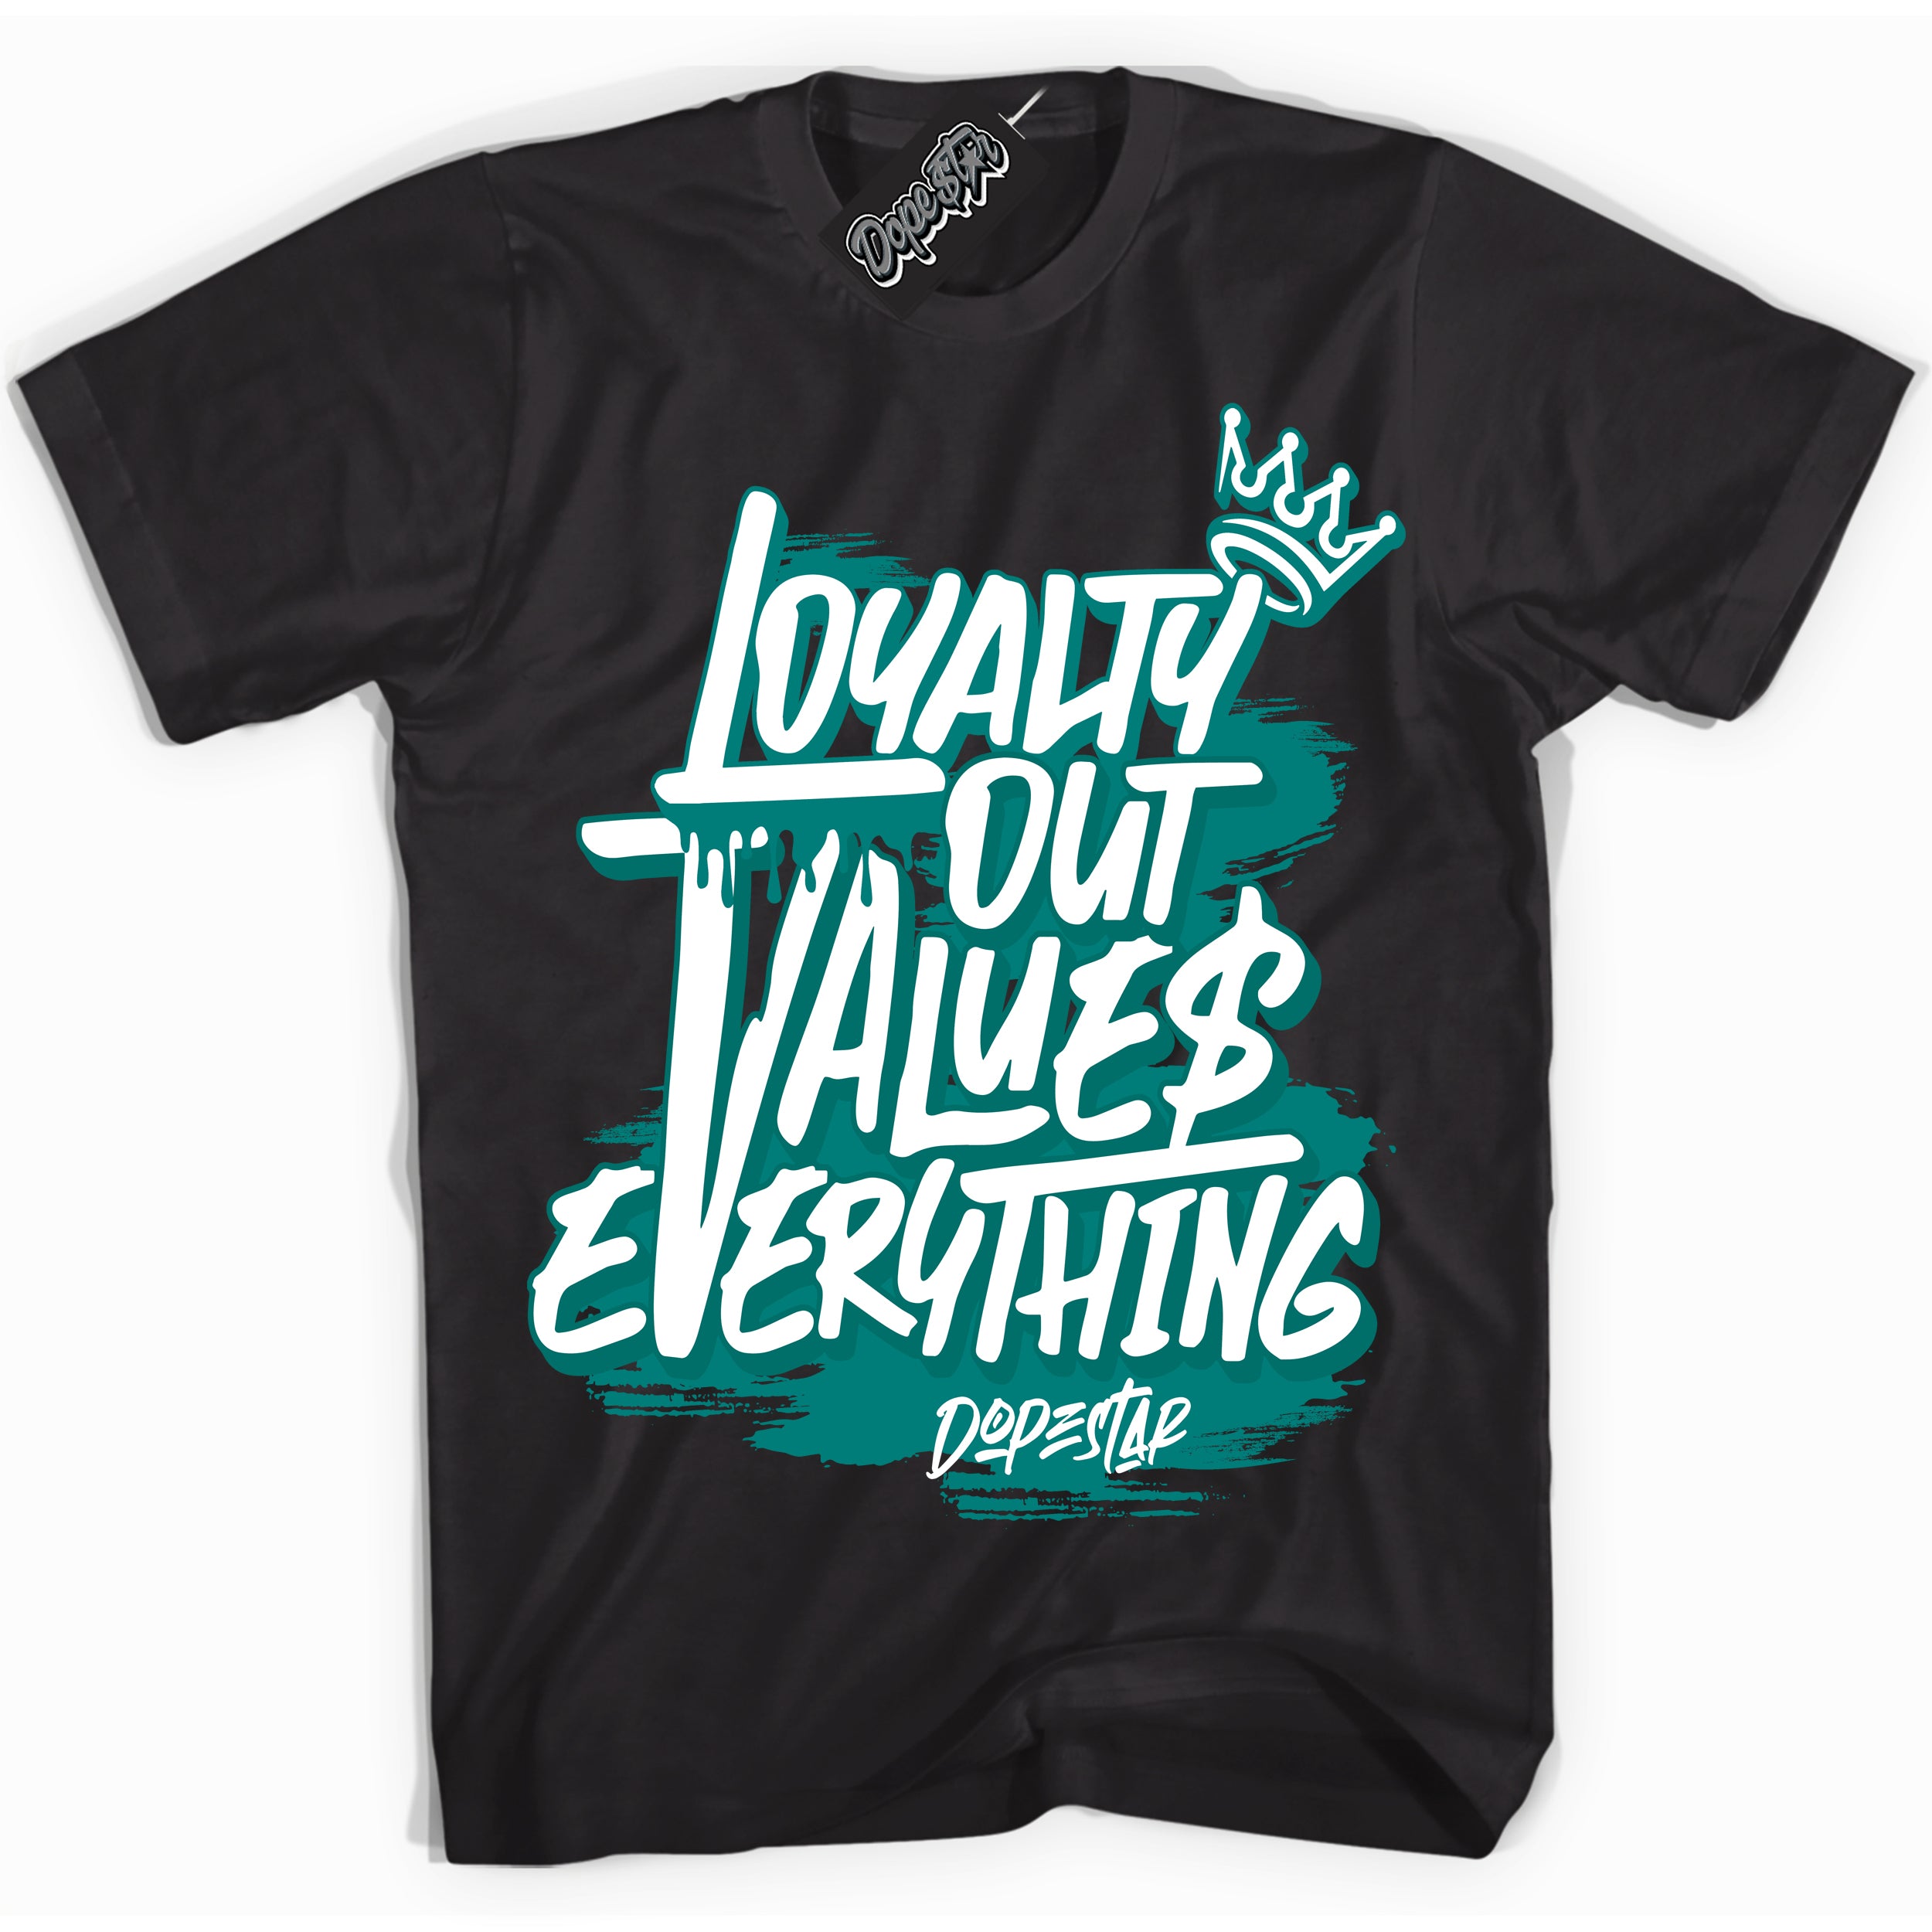 Cool Black Shirt with “ Loyalty Out Values Everything” design that perfectly matches Protro Radiant Emerald 8s Sneakers.